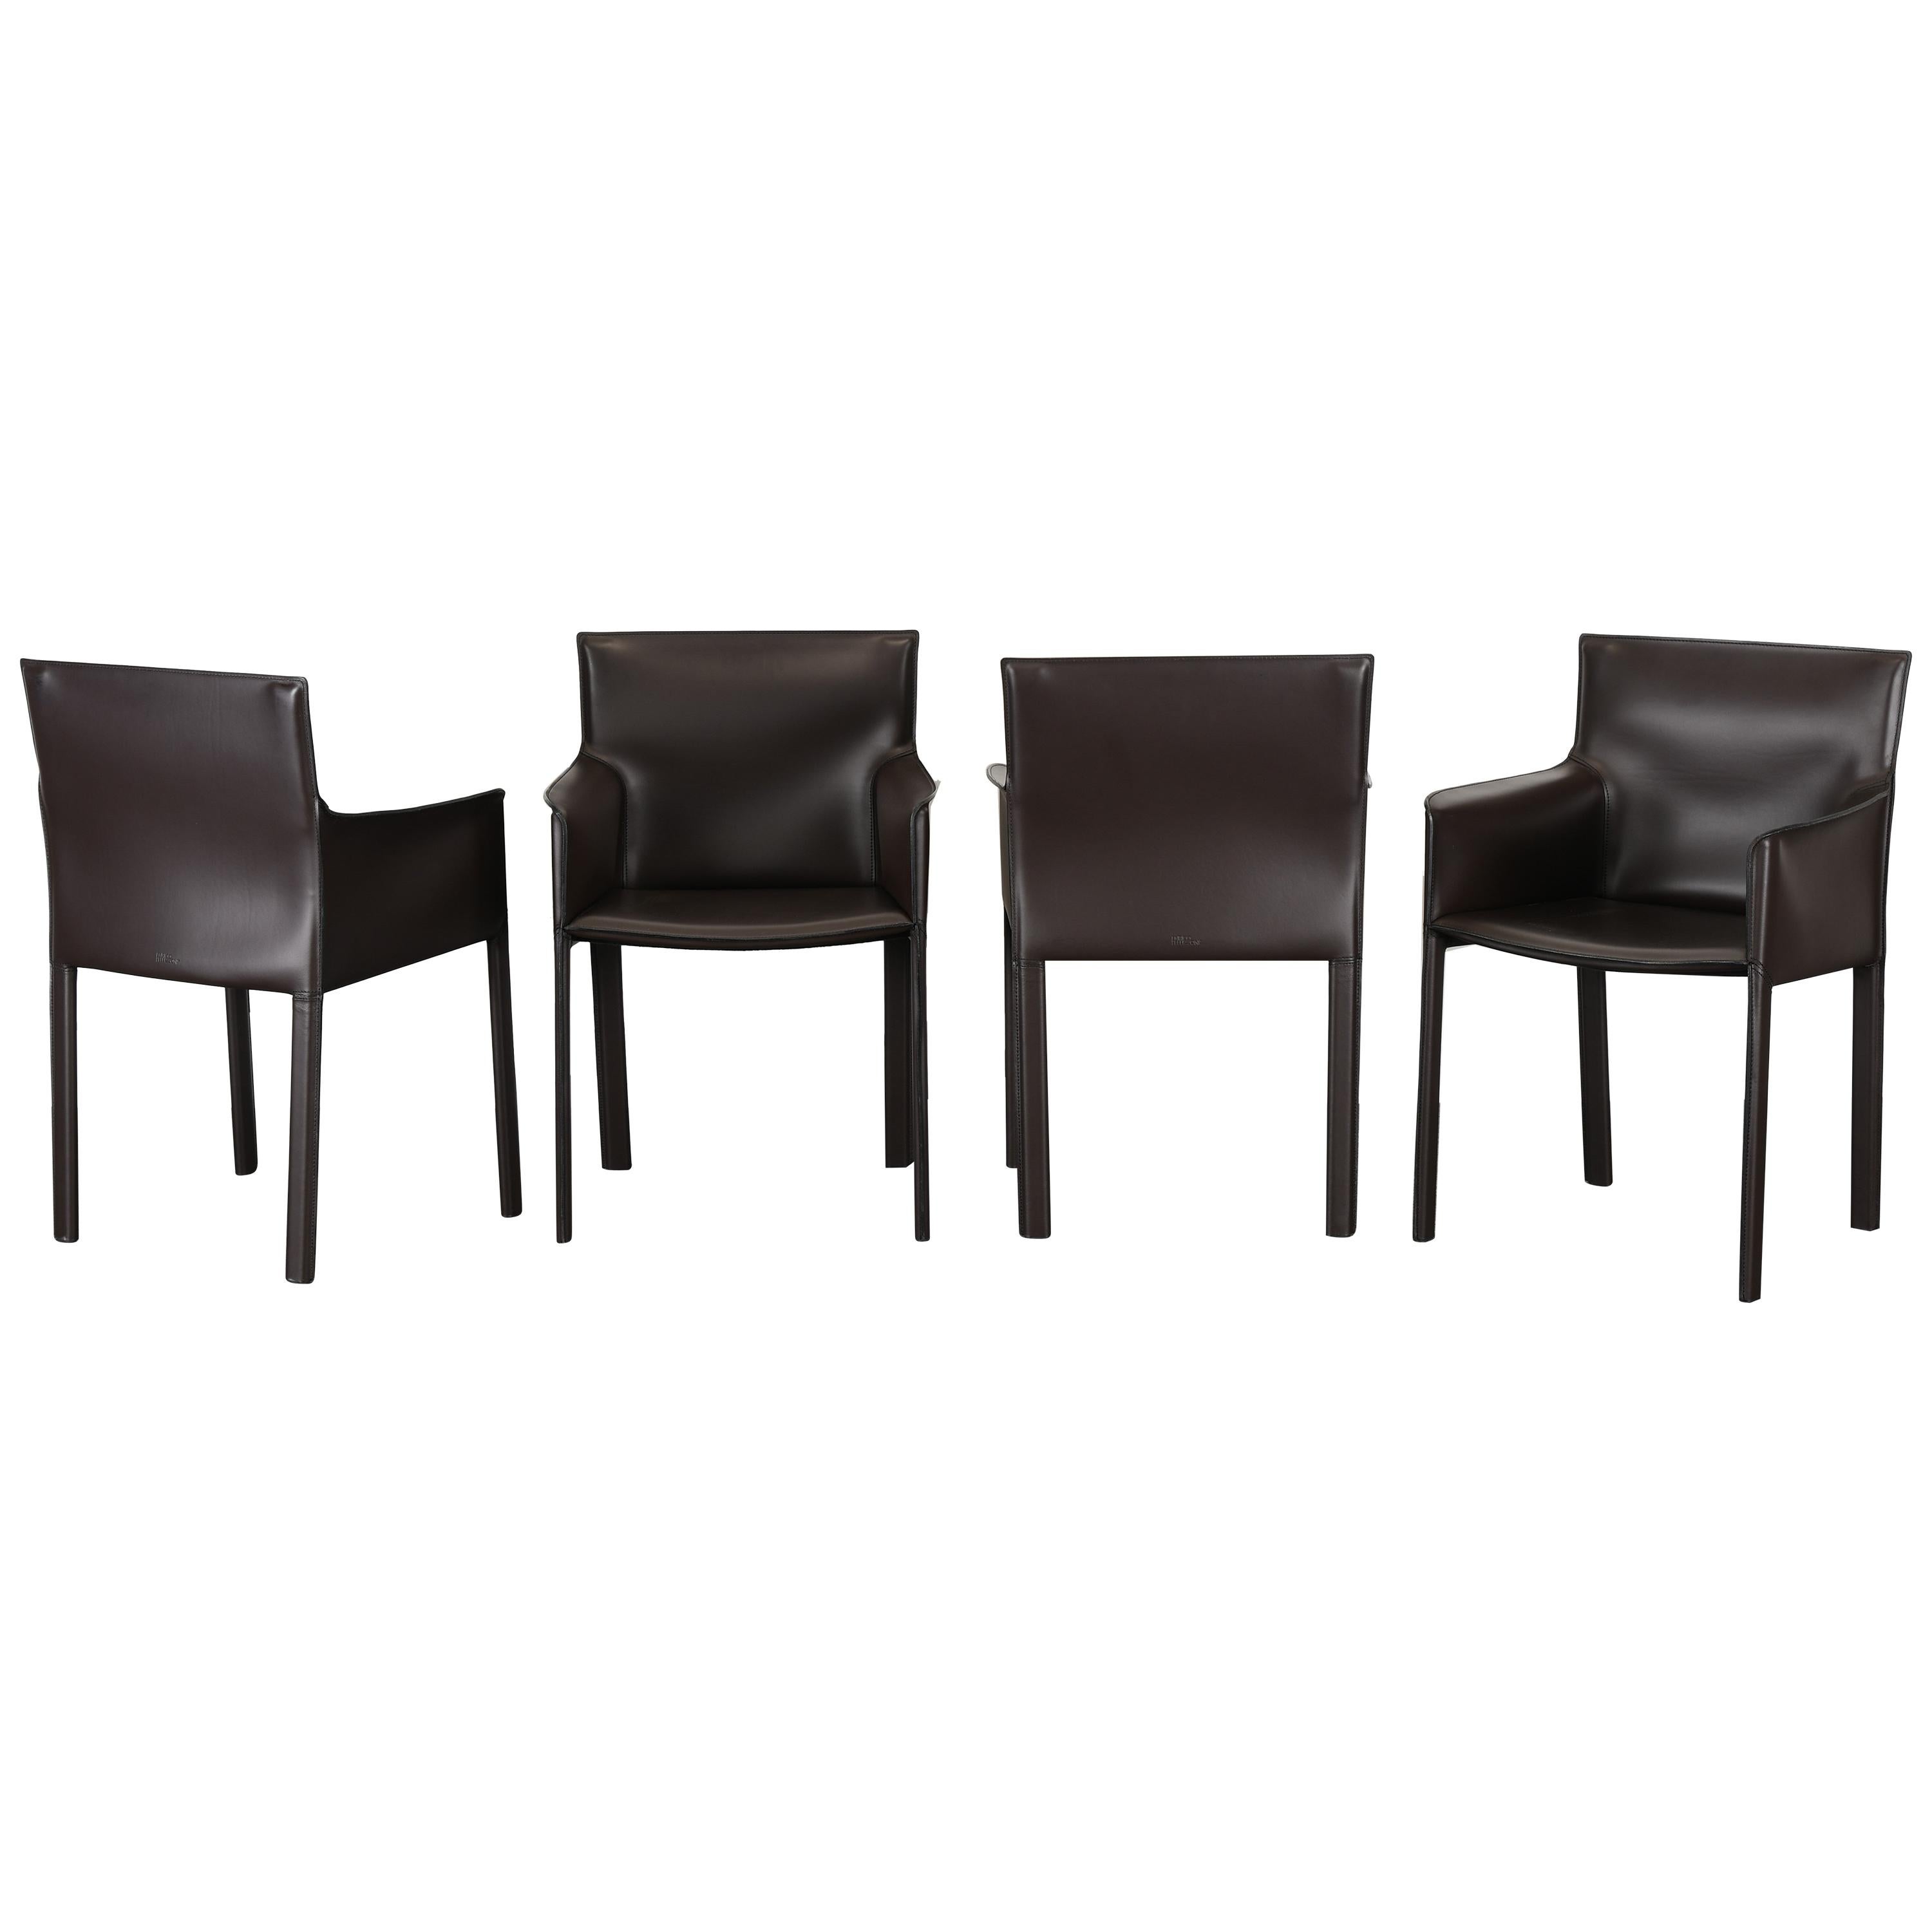 Four Leather Dining Chairs by Enrico Pellizzoni, 2000s